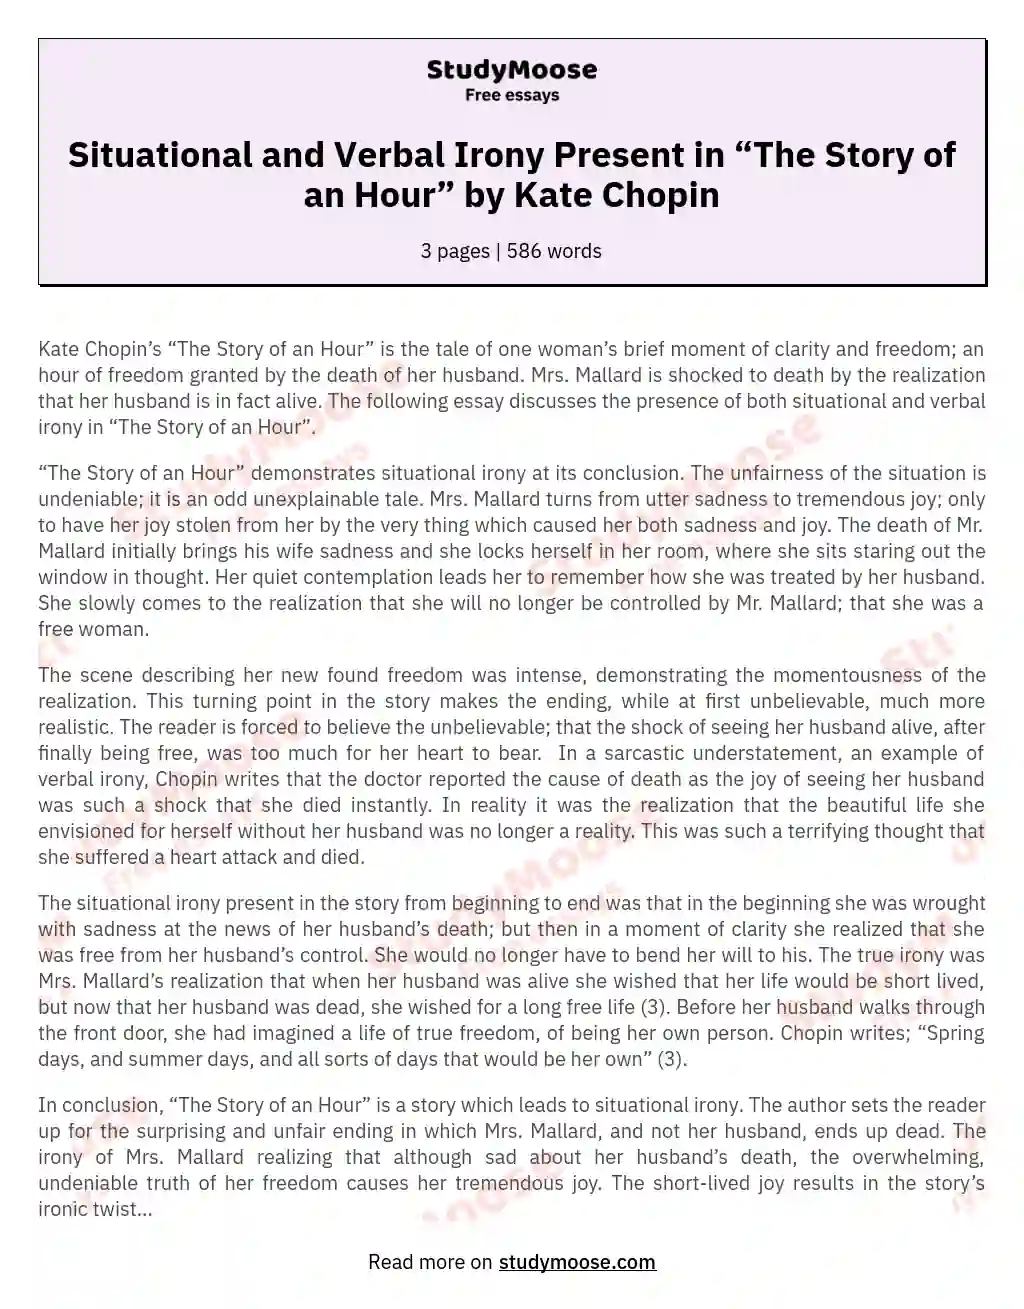 Situational and Verbal Irony Present in “The Story of an Hour” by Kate Chopin essay